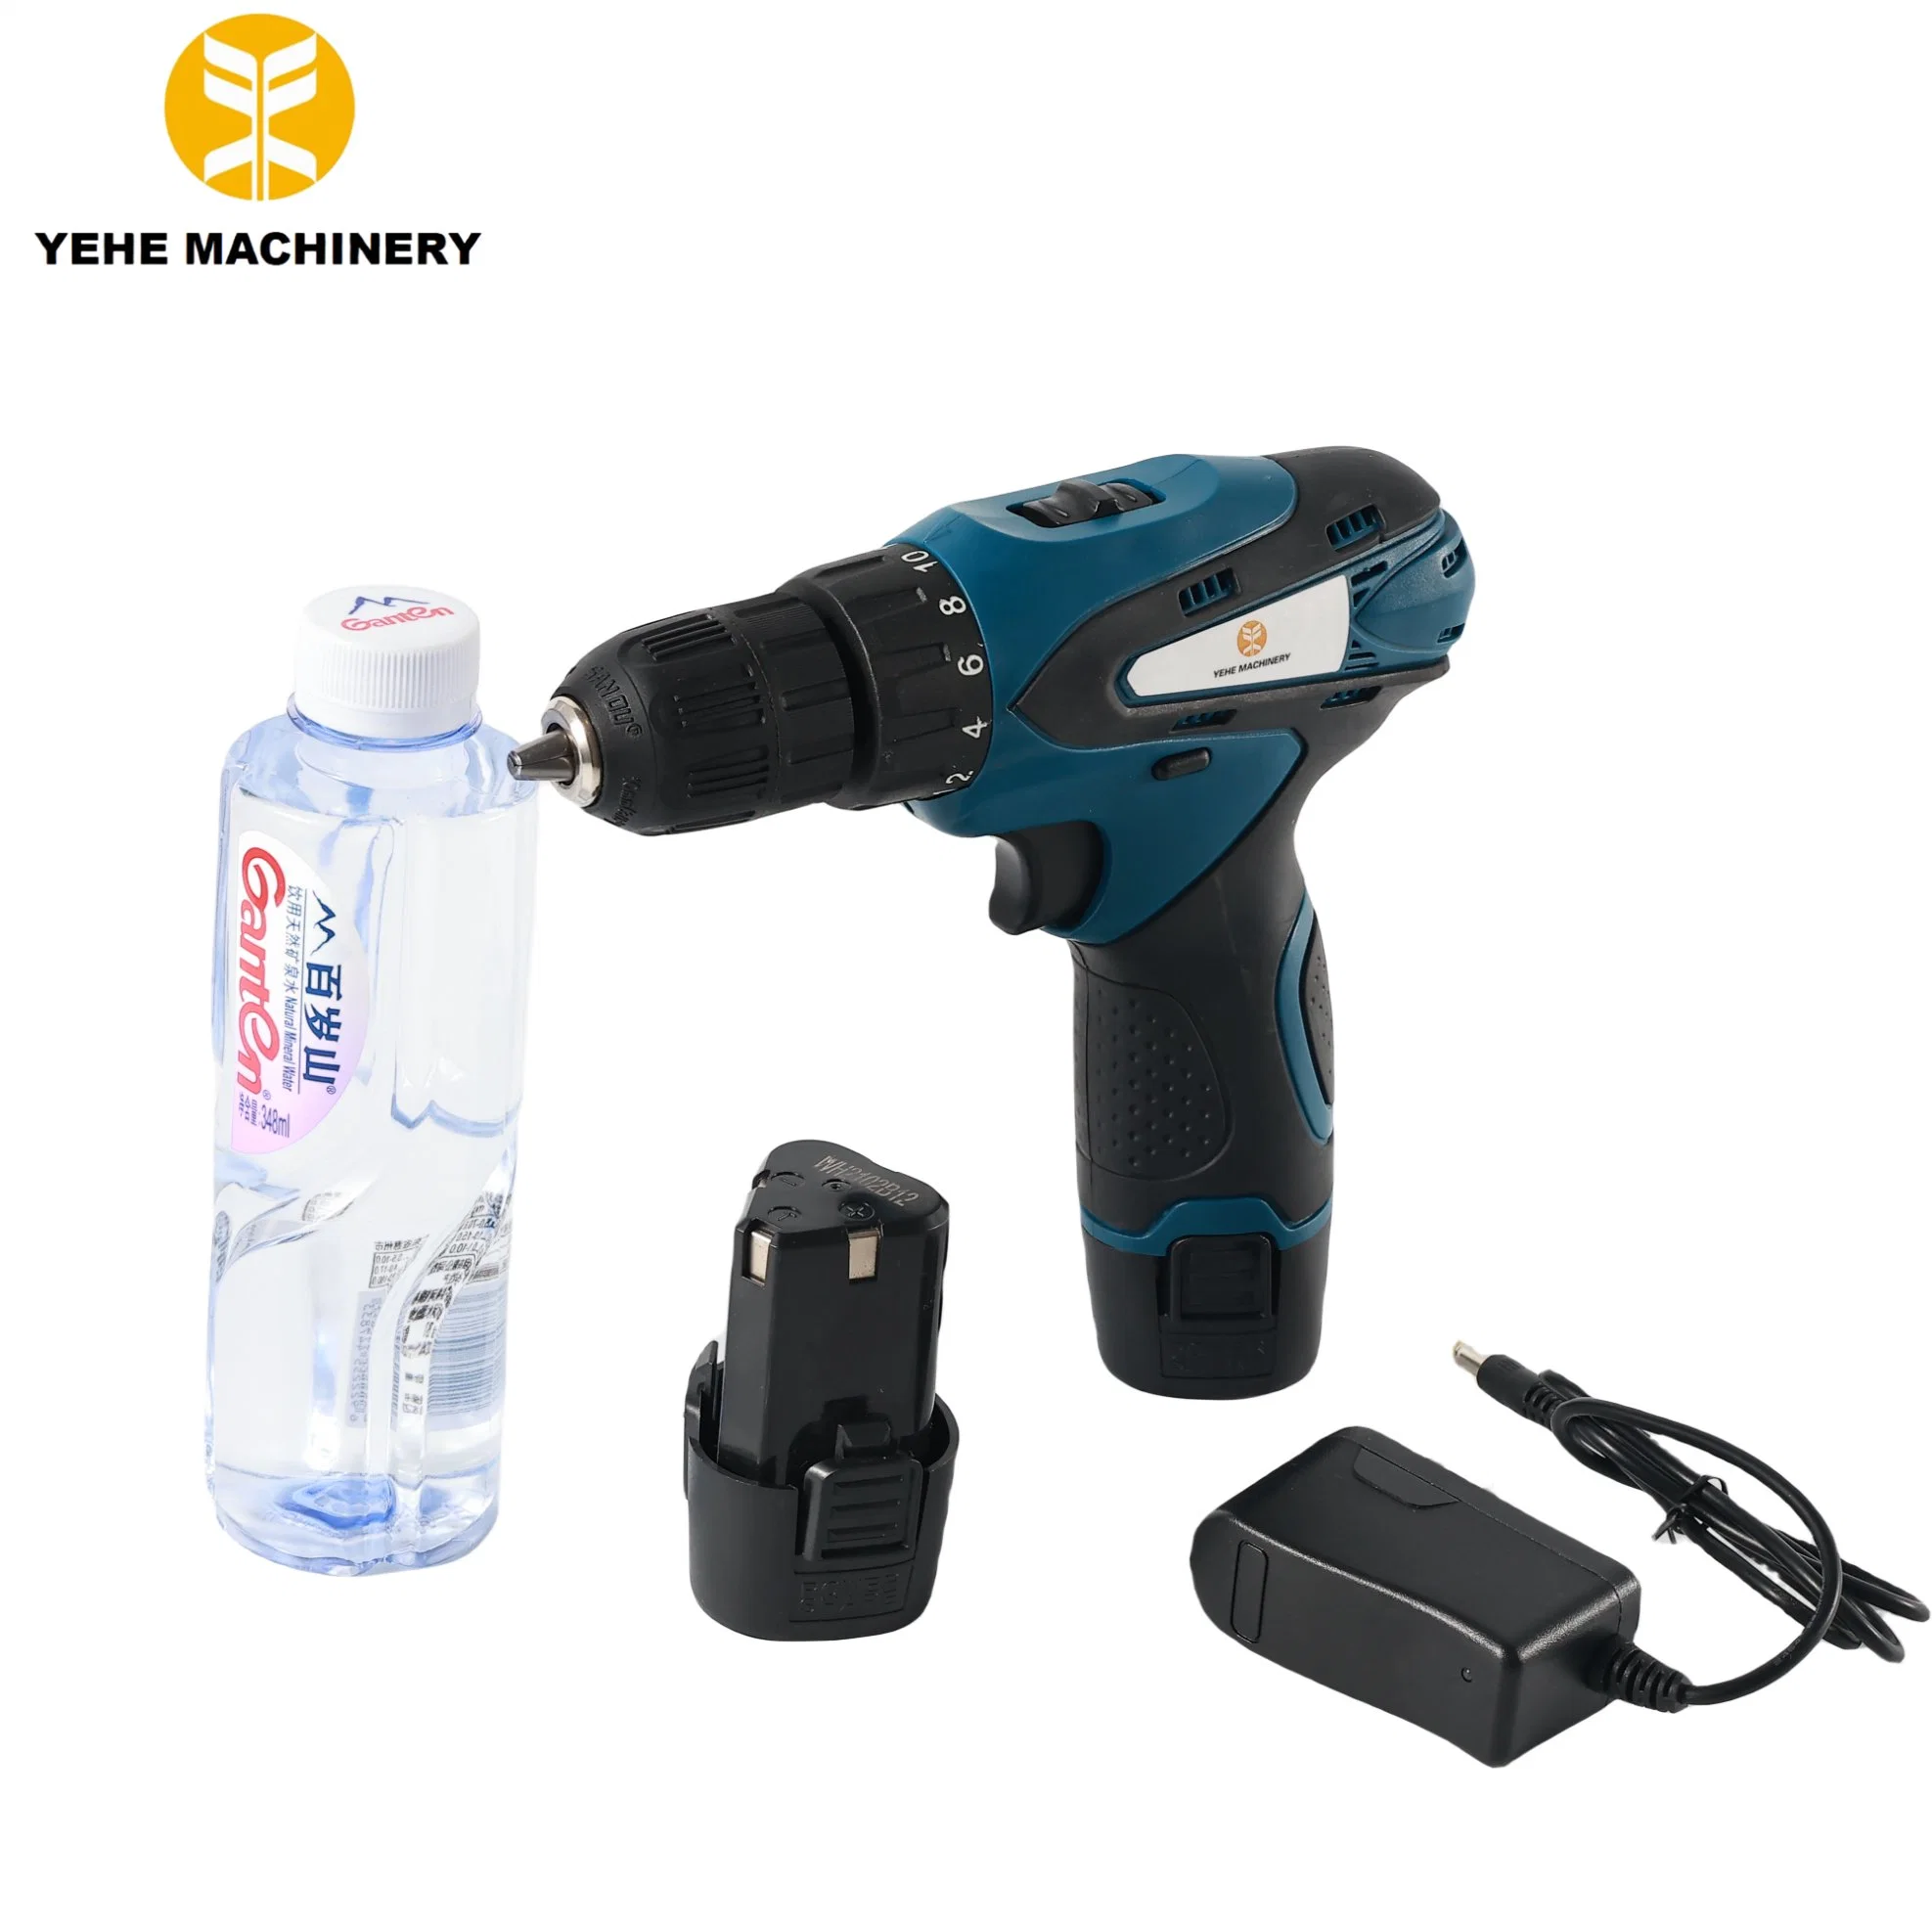 48V Handheld Drill Rechargeable Battery Power Tool Cordless Drill Electric Screwdriver